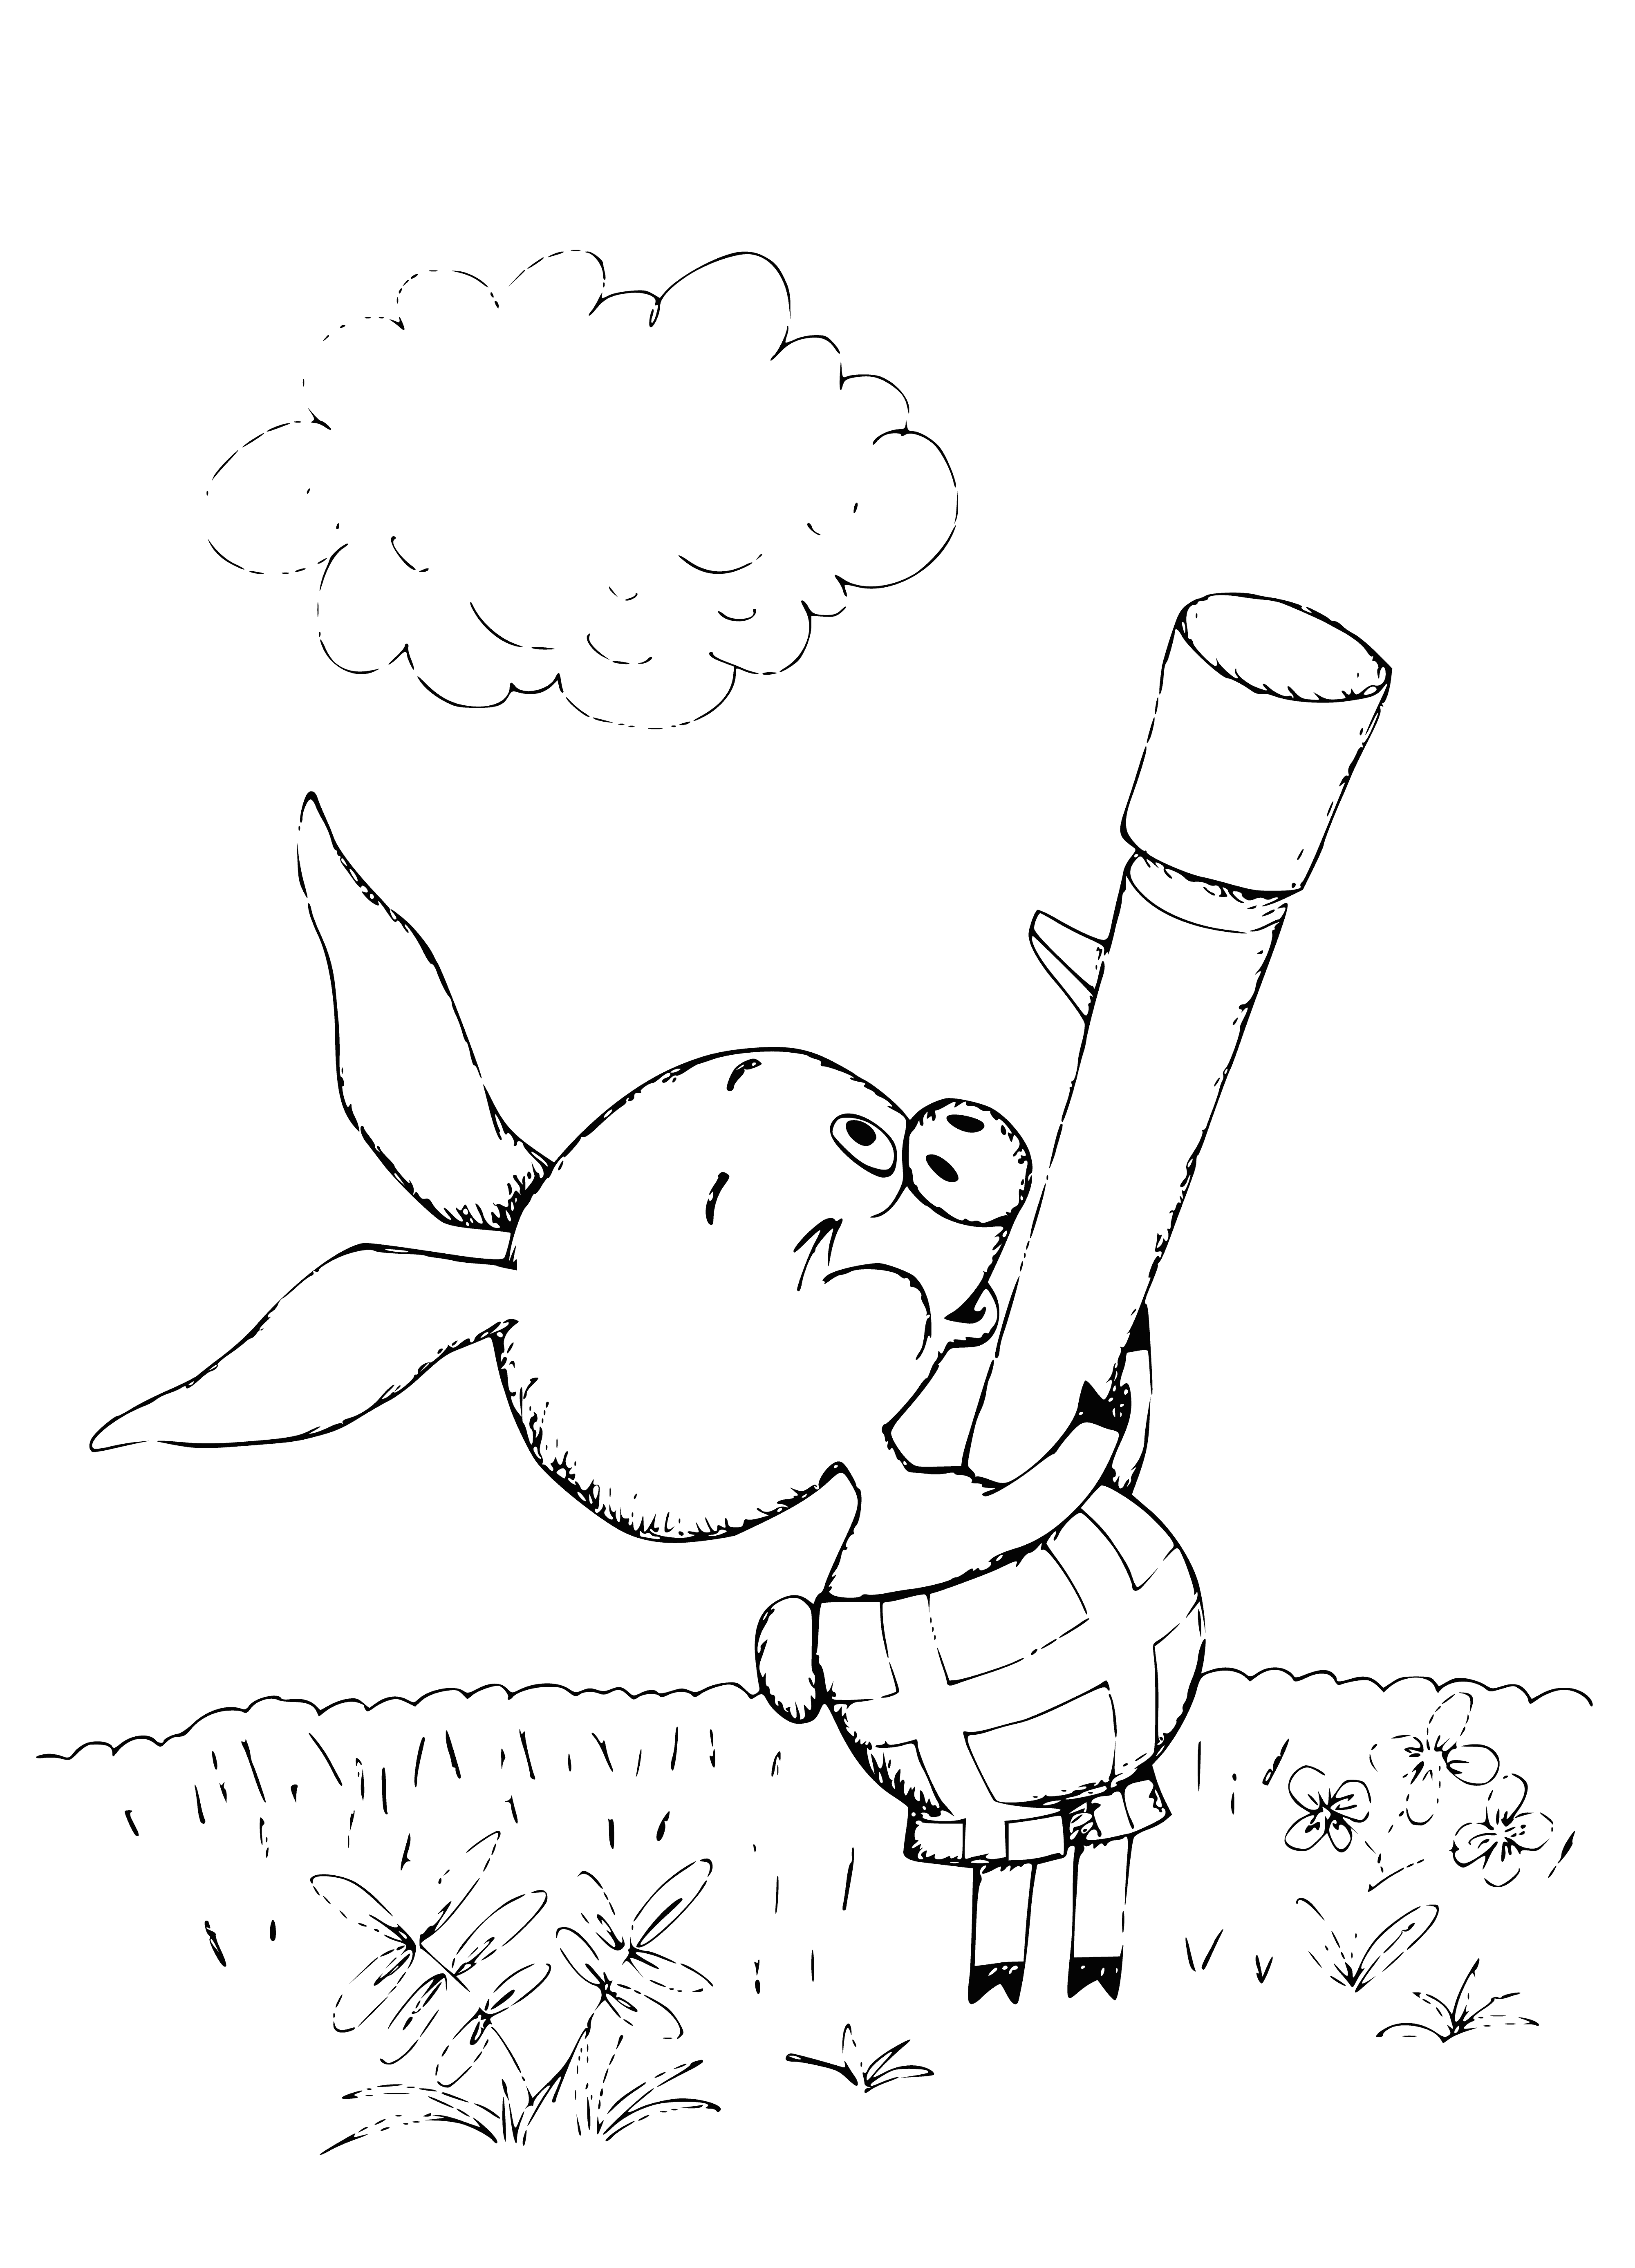 coloring page: Scared Piglet holds a gun in a forest setting.